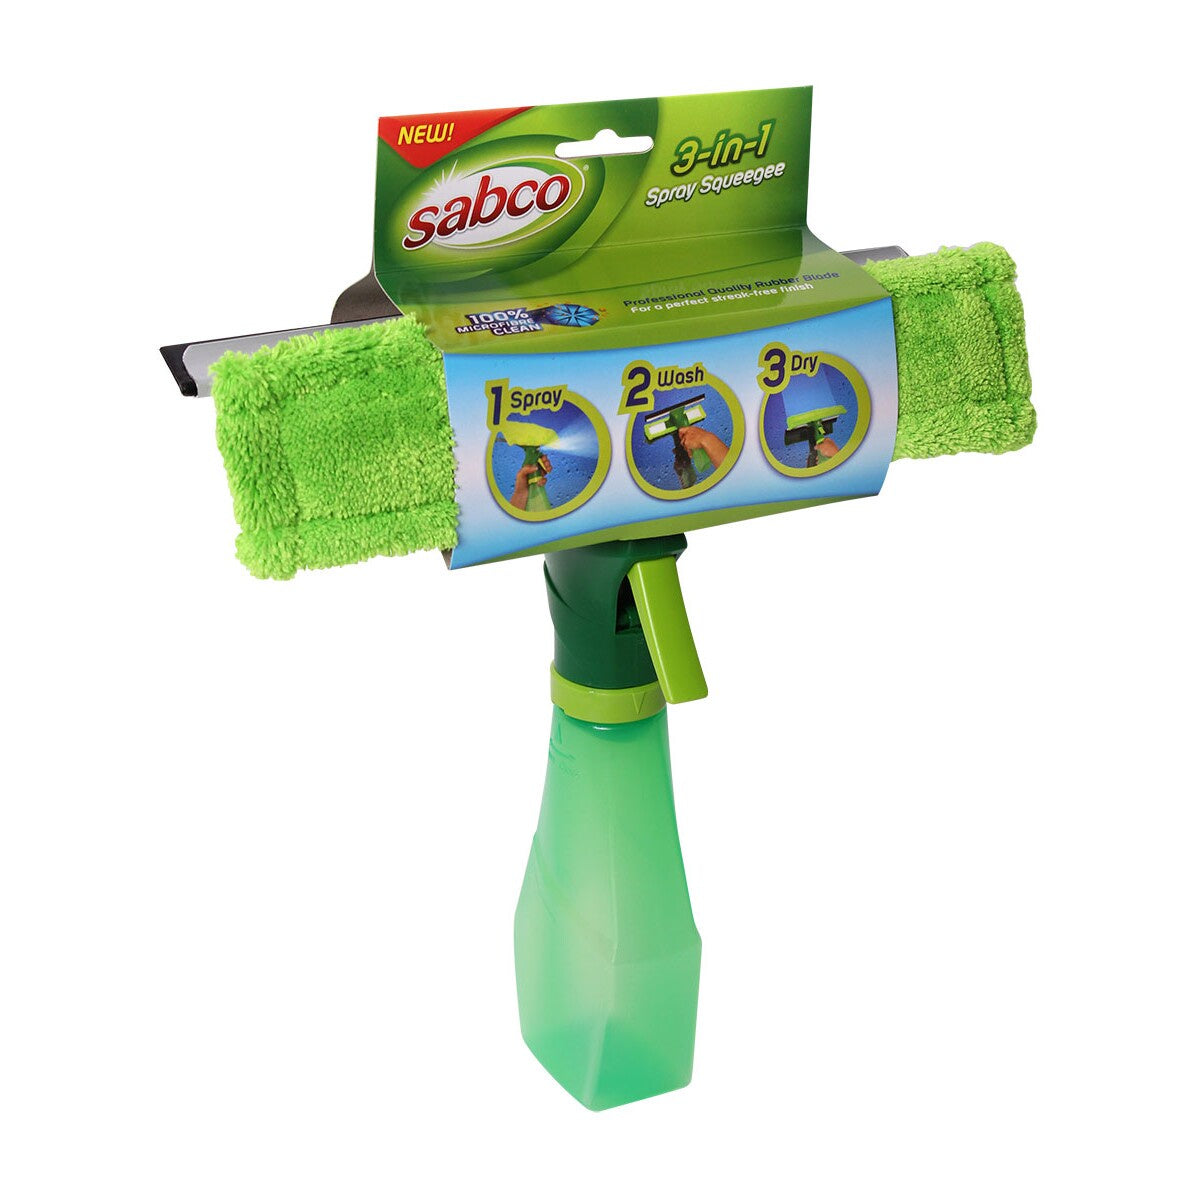 Sabco Window Washer 3 in 1